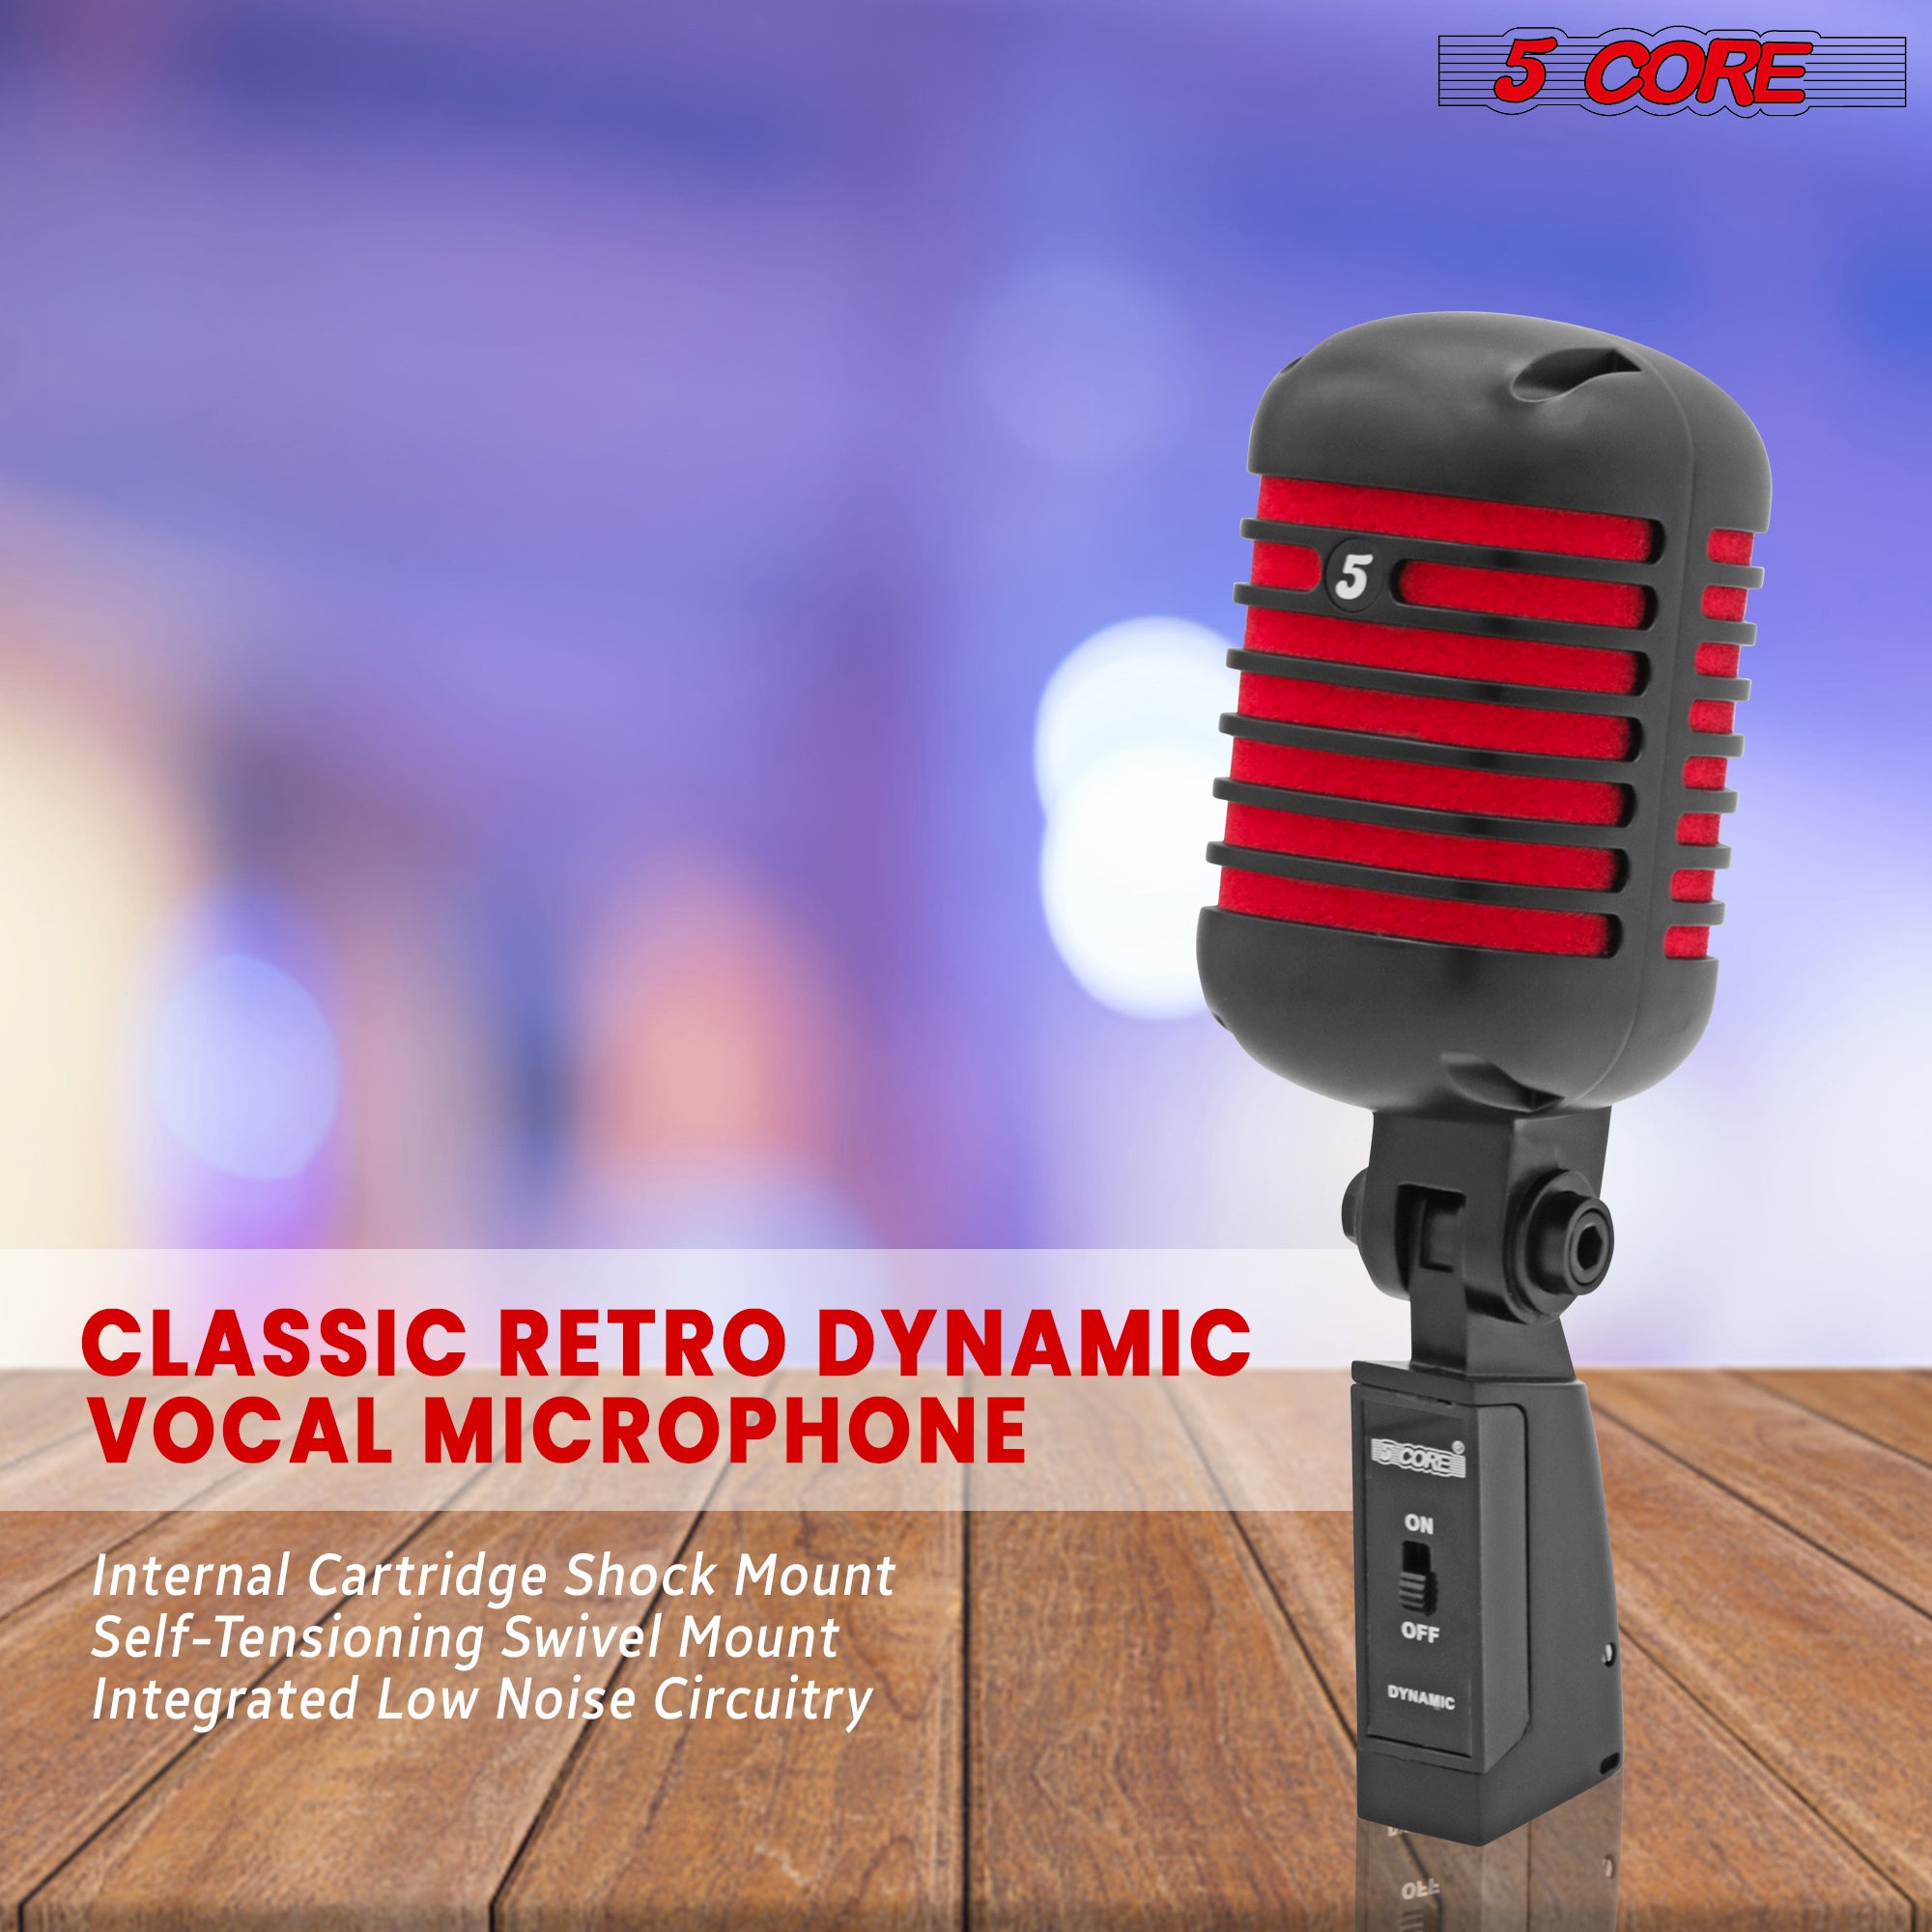 5 Core Classic Retro Dynamic Vocal Microphone Matte Black Red Old Vintage Style Unidirectional Professional Cardioid Mic for Instrument Live Performance Prop & Studio Recording -RTRO MIC CH BLK-RED